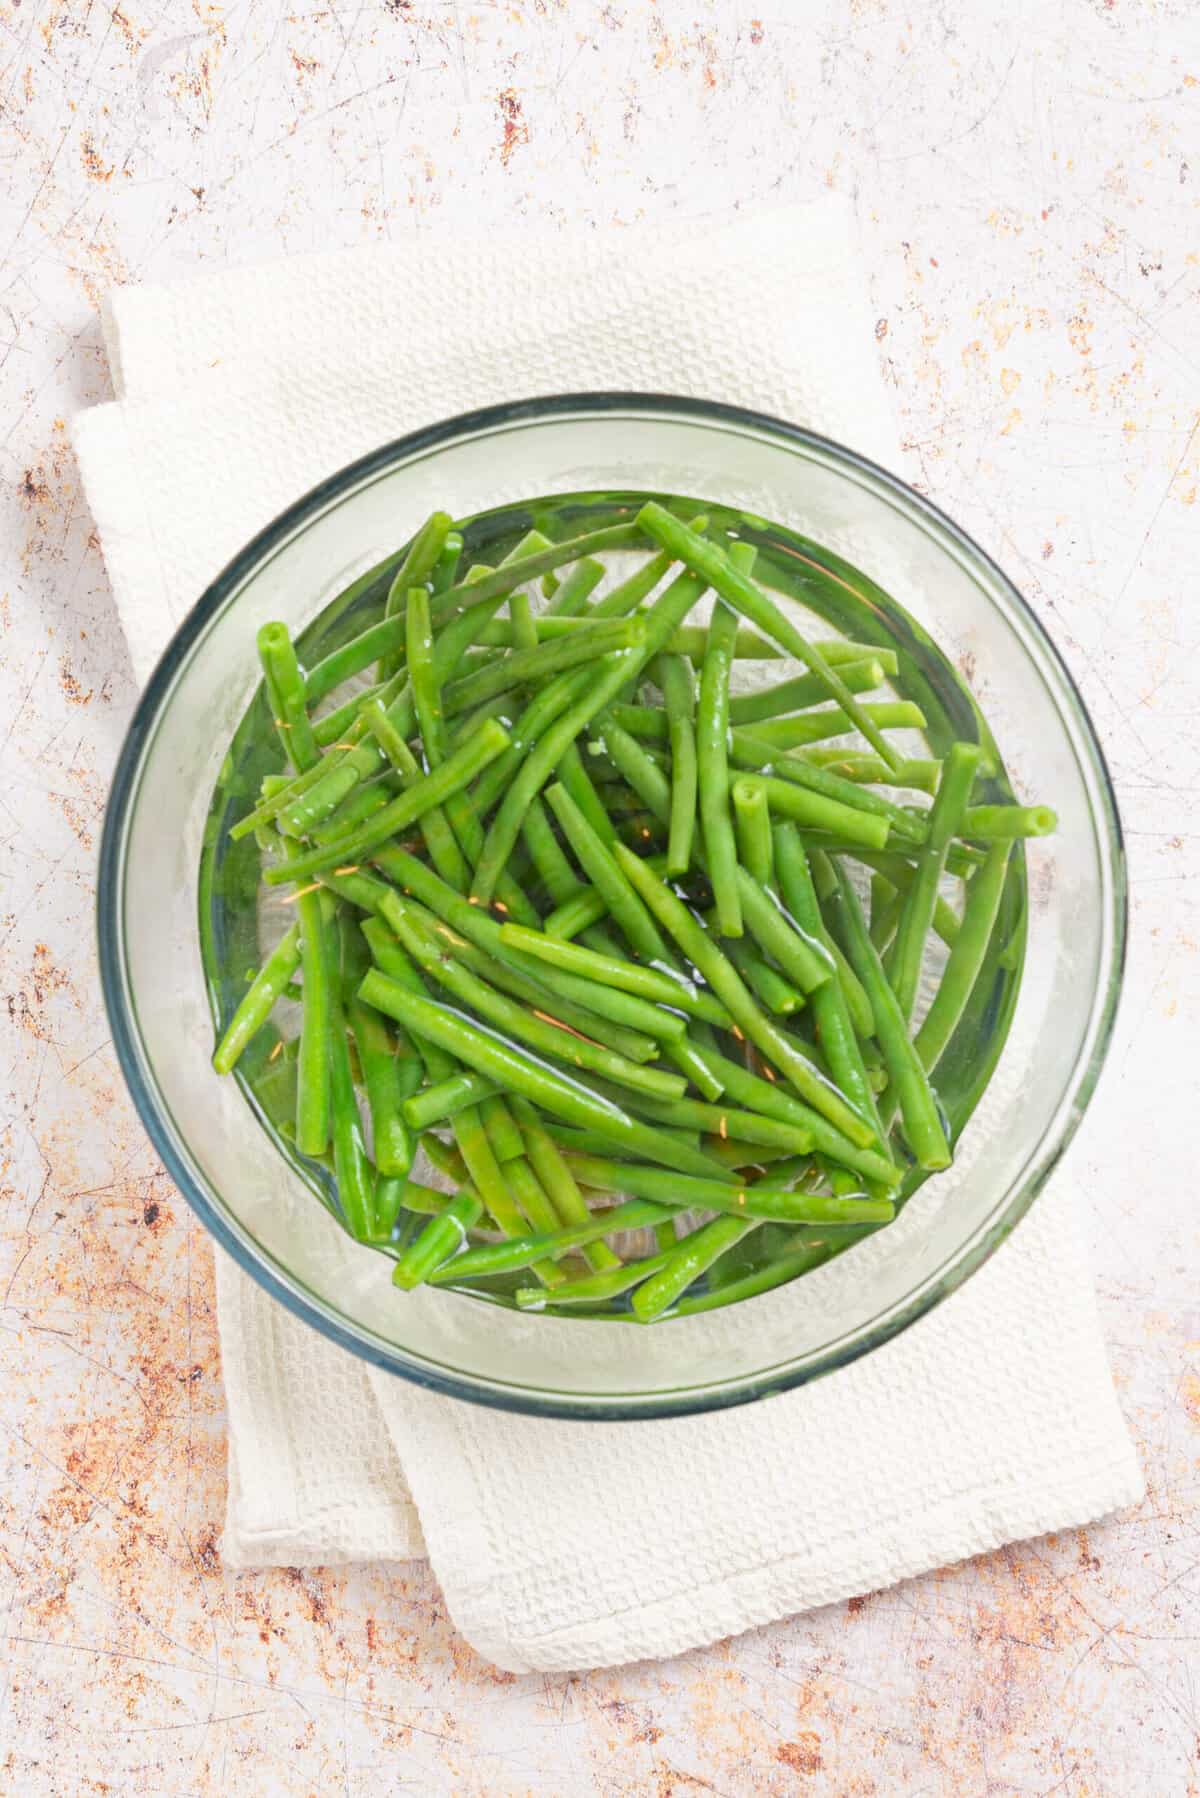 An image of green beans immersed in a bowl of ice cold water.